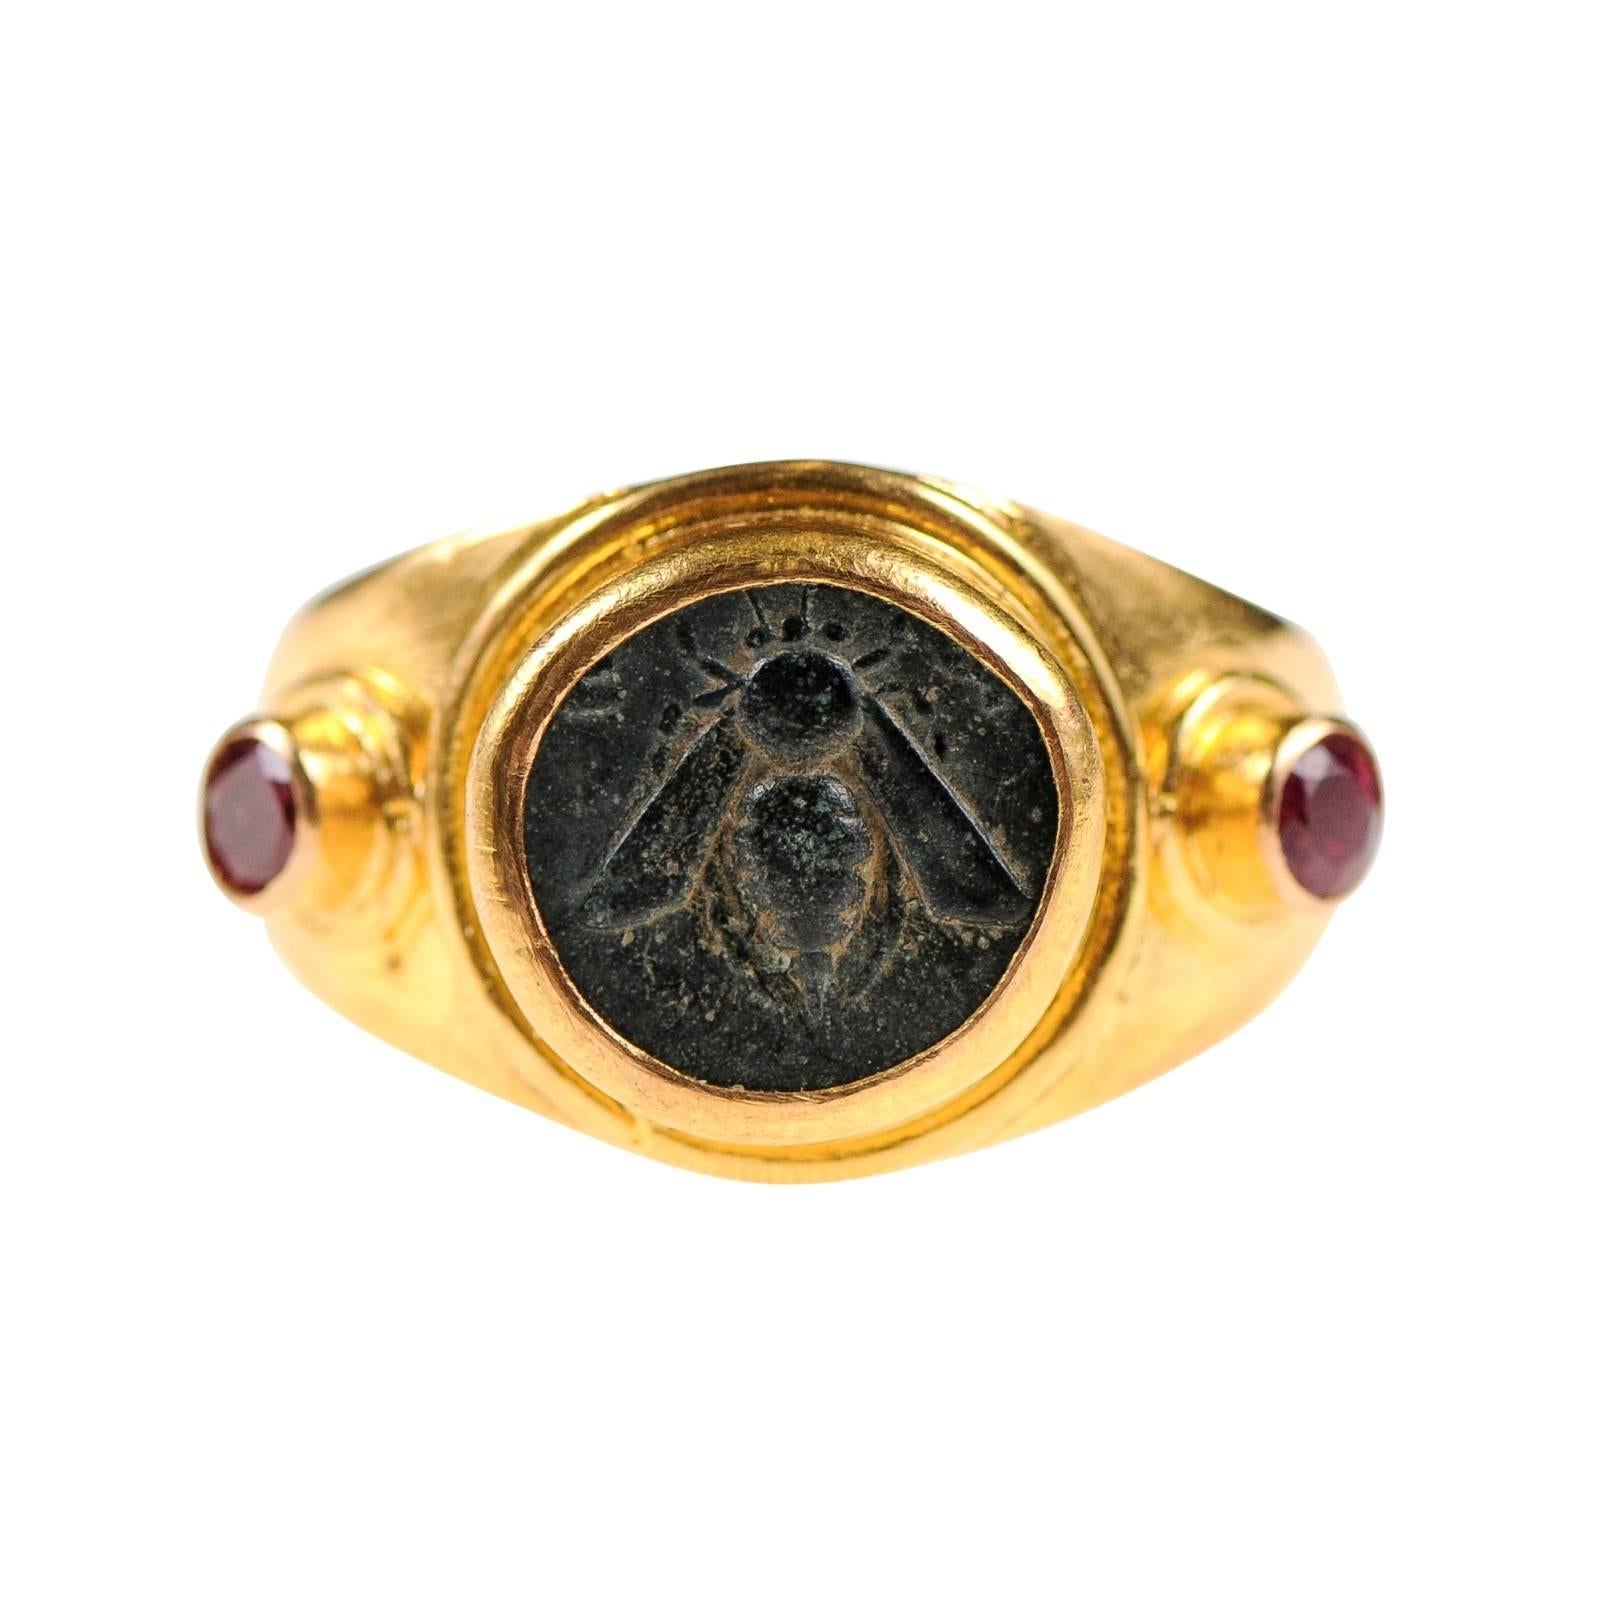 Ancient Greek Ephesos, Ionia Bronze Coin Set in Gold Ring Flanked by Rubies